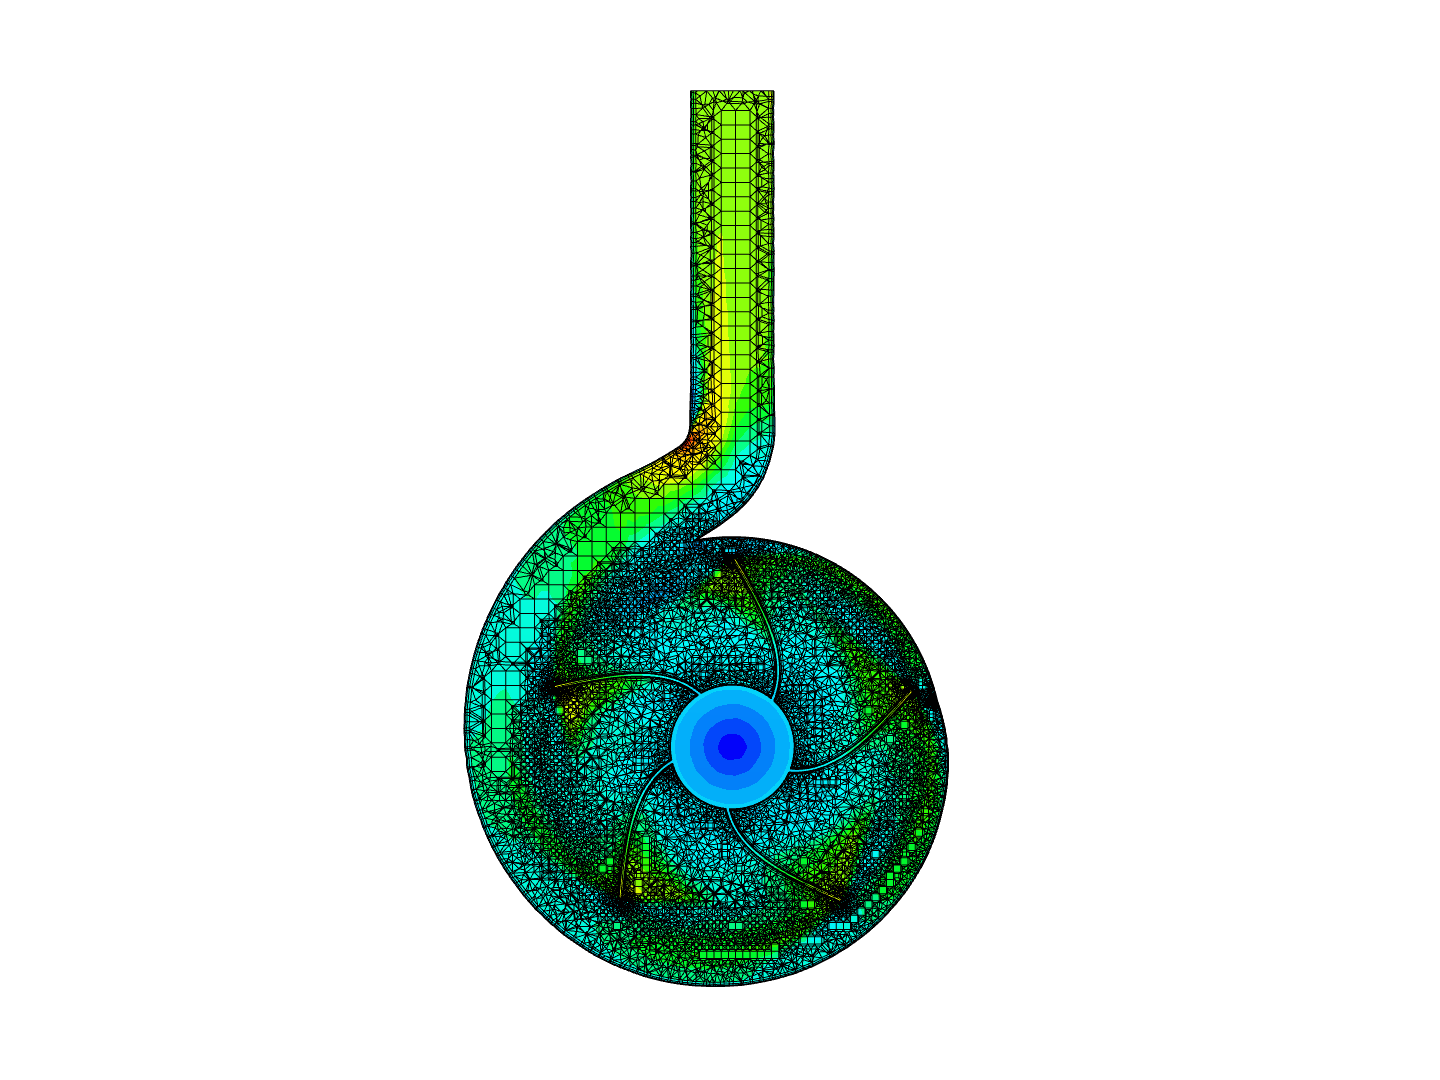 My first CFD image